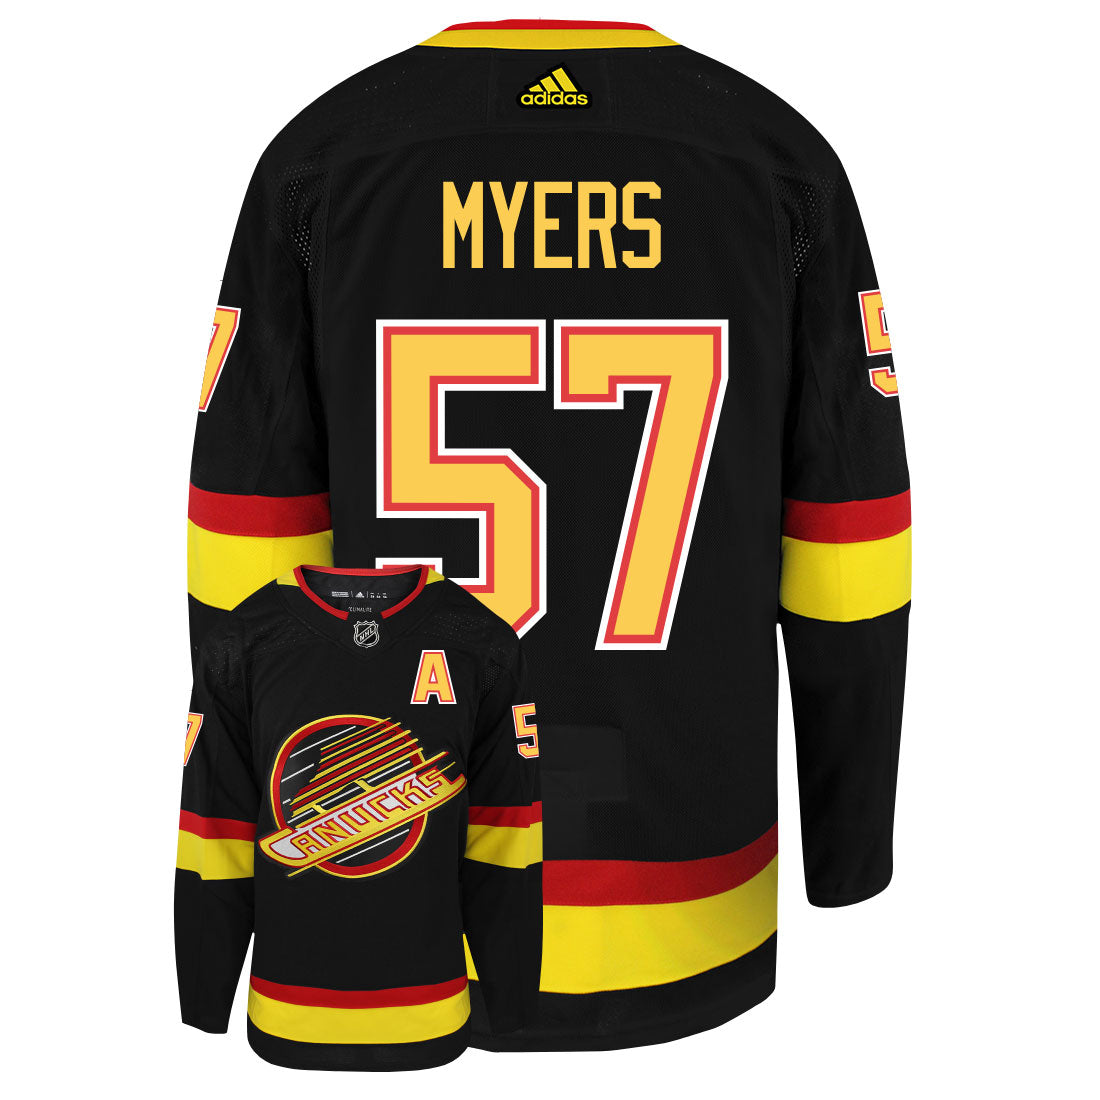 Tyler Myers Vancouver Canucks Adidas Primegreen Authentic Third Alternate NHL Hockey Jersey - Back/Front View